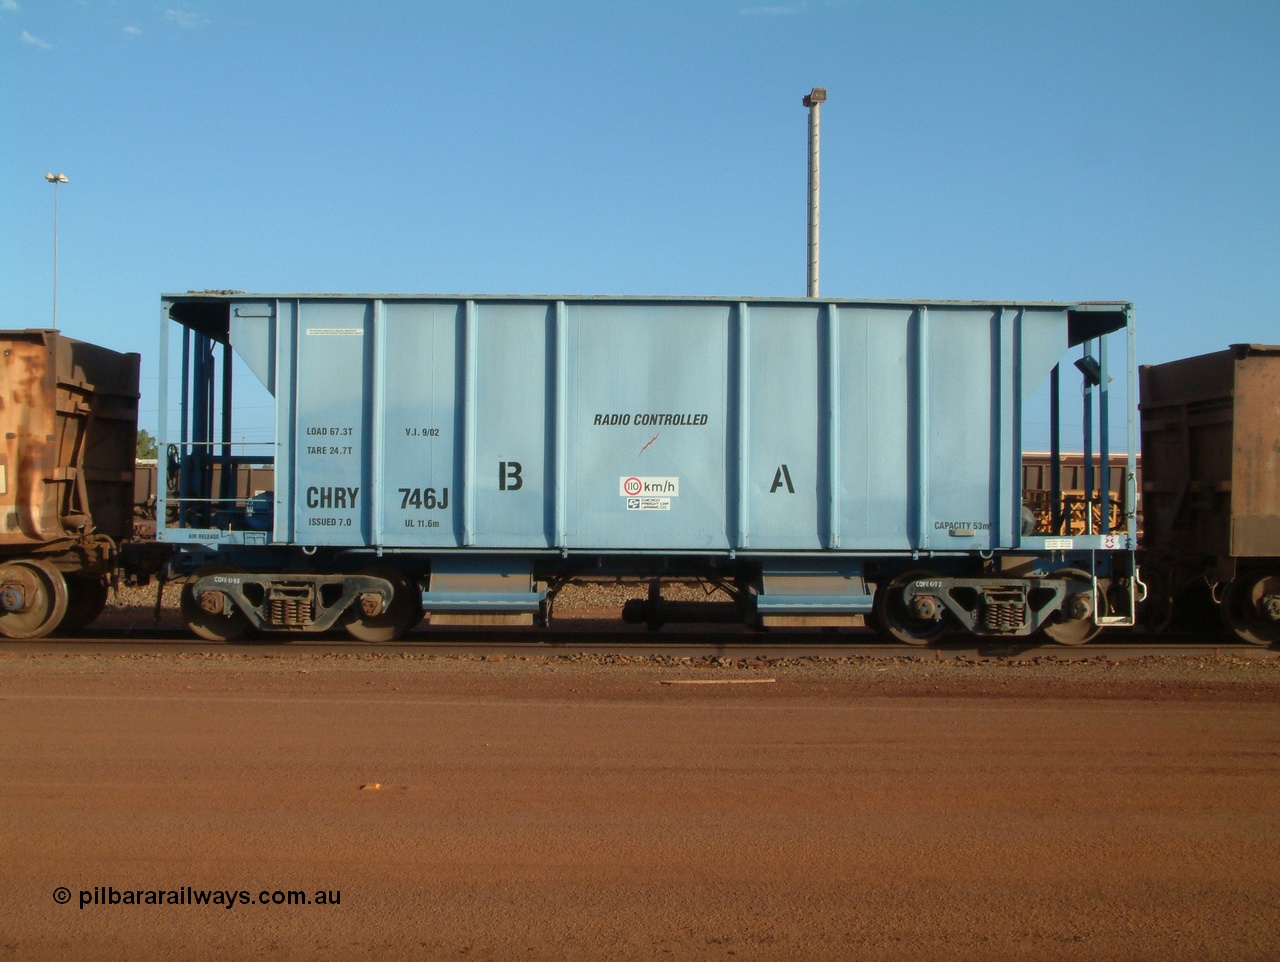 041225 064817
Nelson Point, CFCLA ballast waggon CHRY type CHRY 746, side view from the ore car repair shop roads.
Keywords: CHRY-type;CHRY746;CFCLA;CRDX-type;BHP-ballast-waggon;